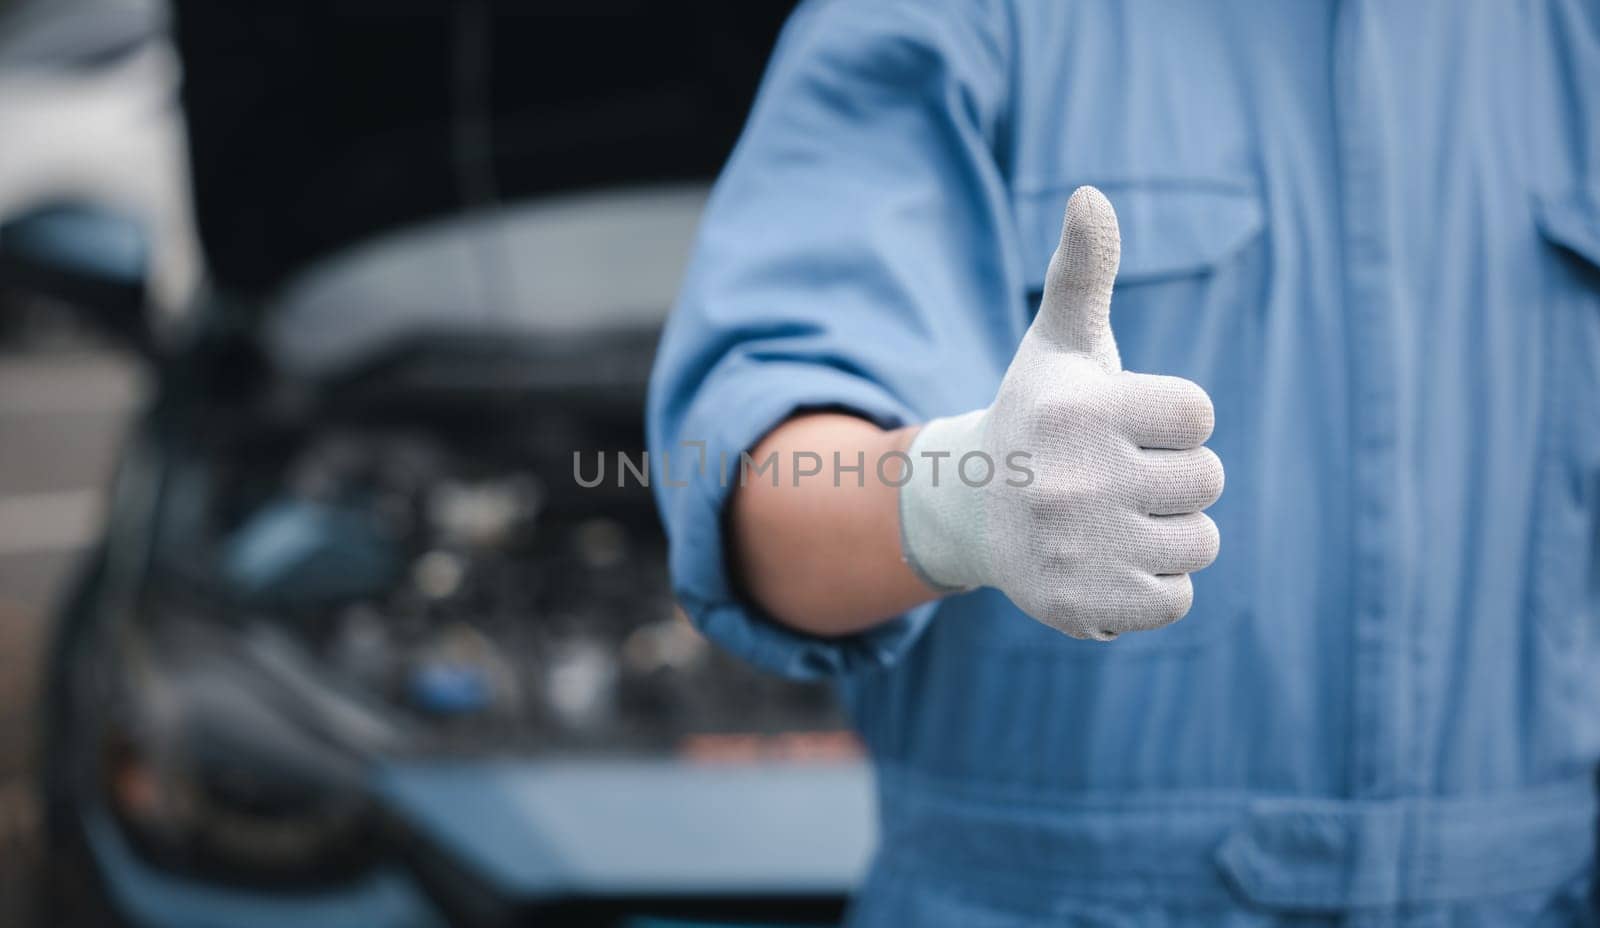 Mechanic in jumpsuit checks car gives thumbs up. Expertise in repair and service ensuring safety and quality. Skilled technician working in automotive industry smiling.